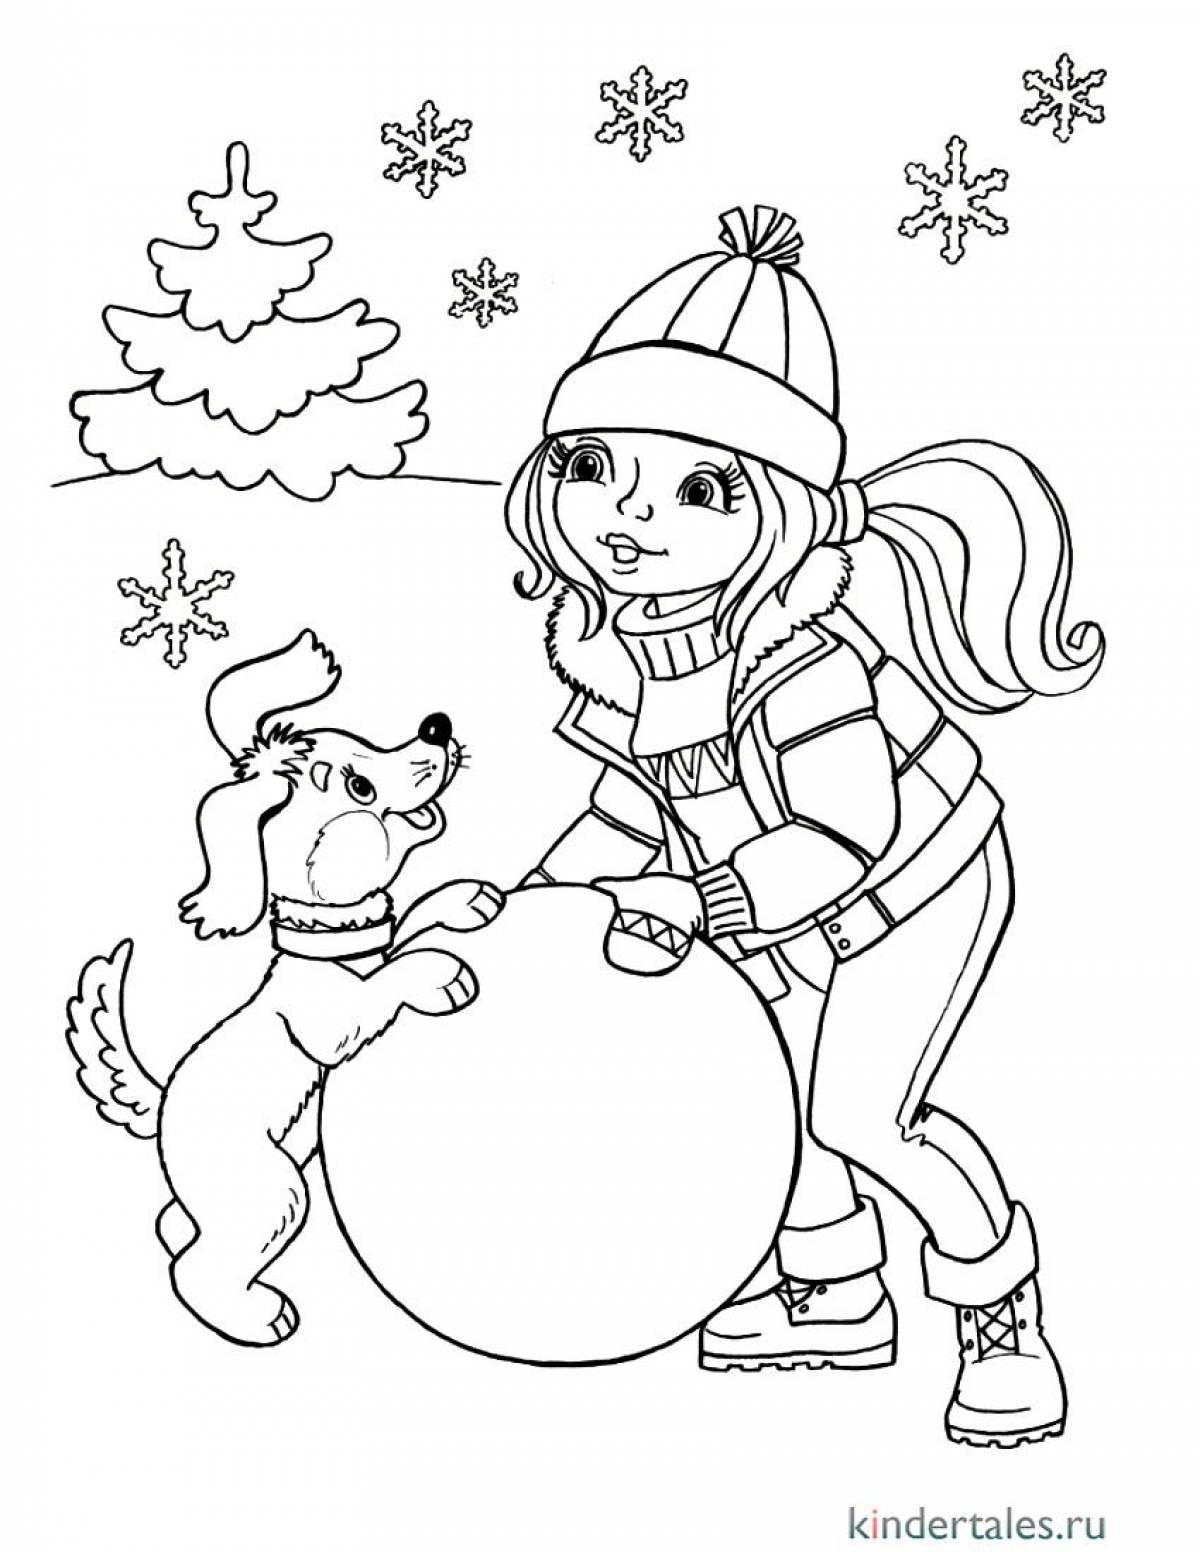 Funny winter coloring book for children 4-5 years old